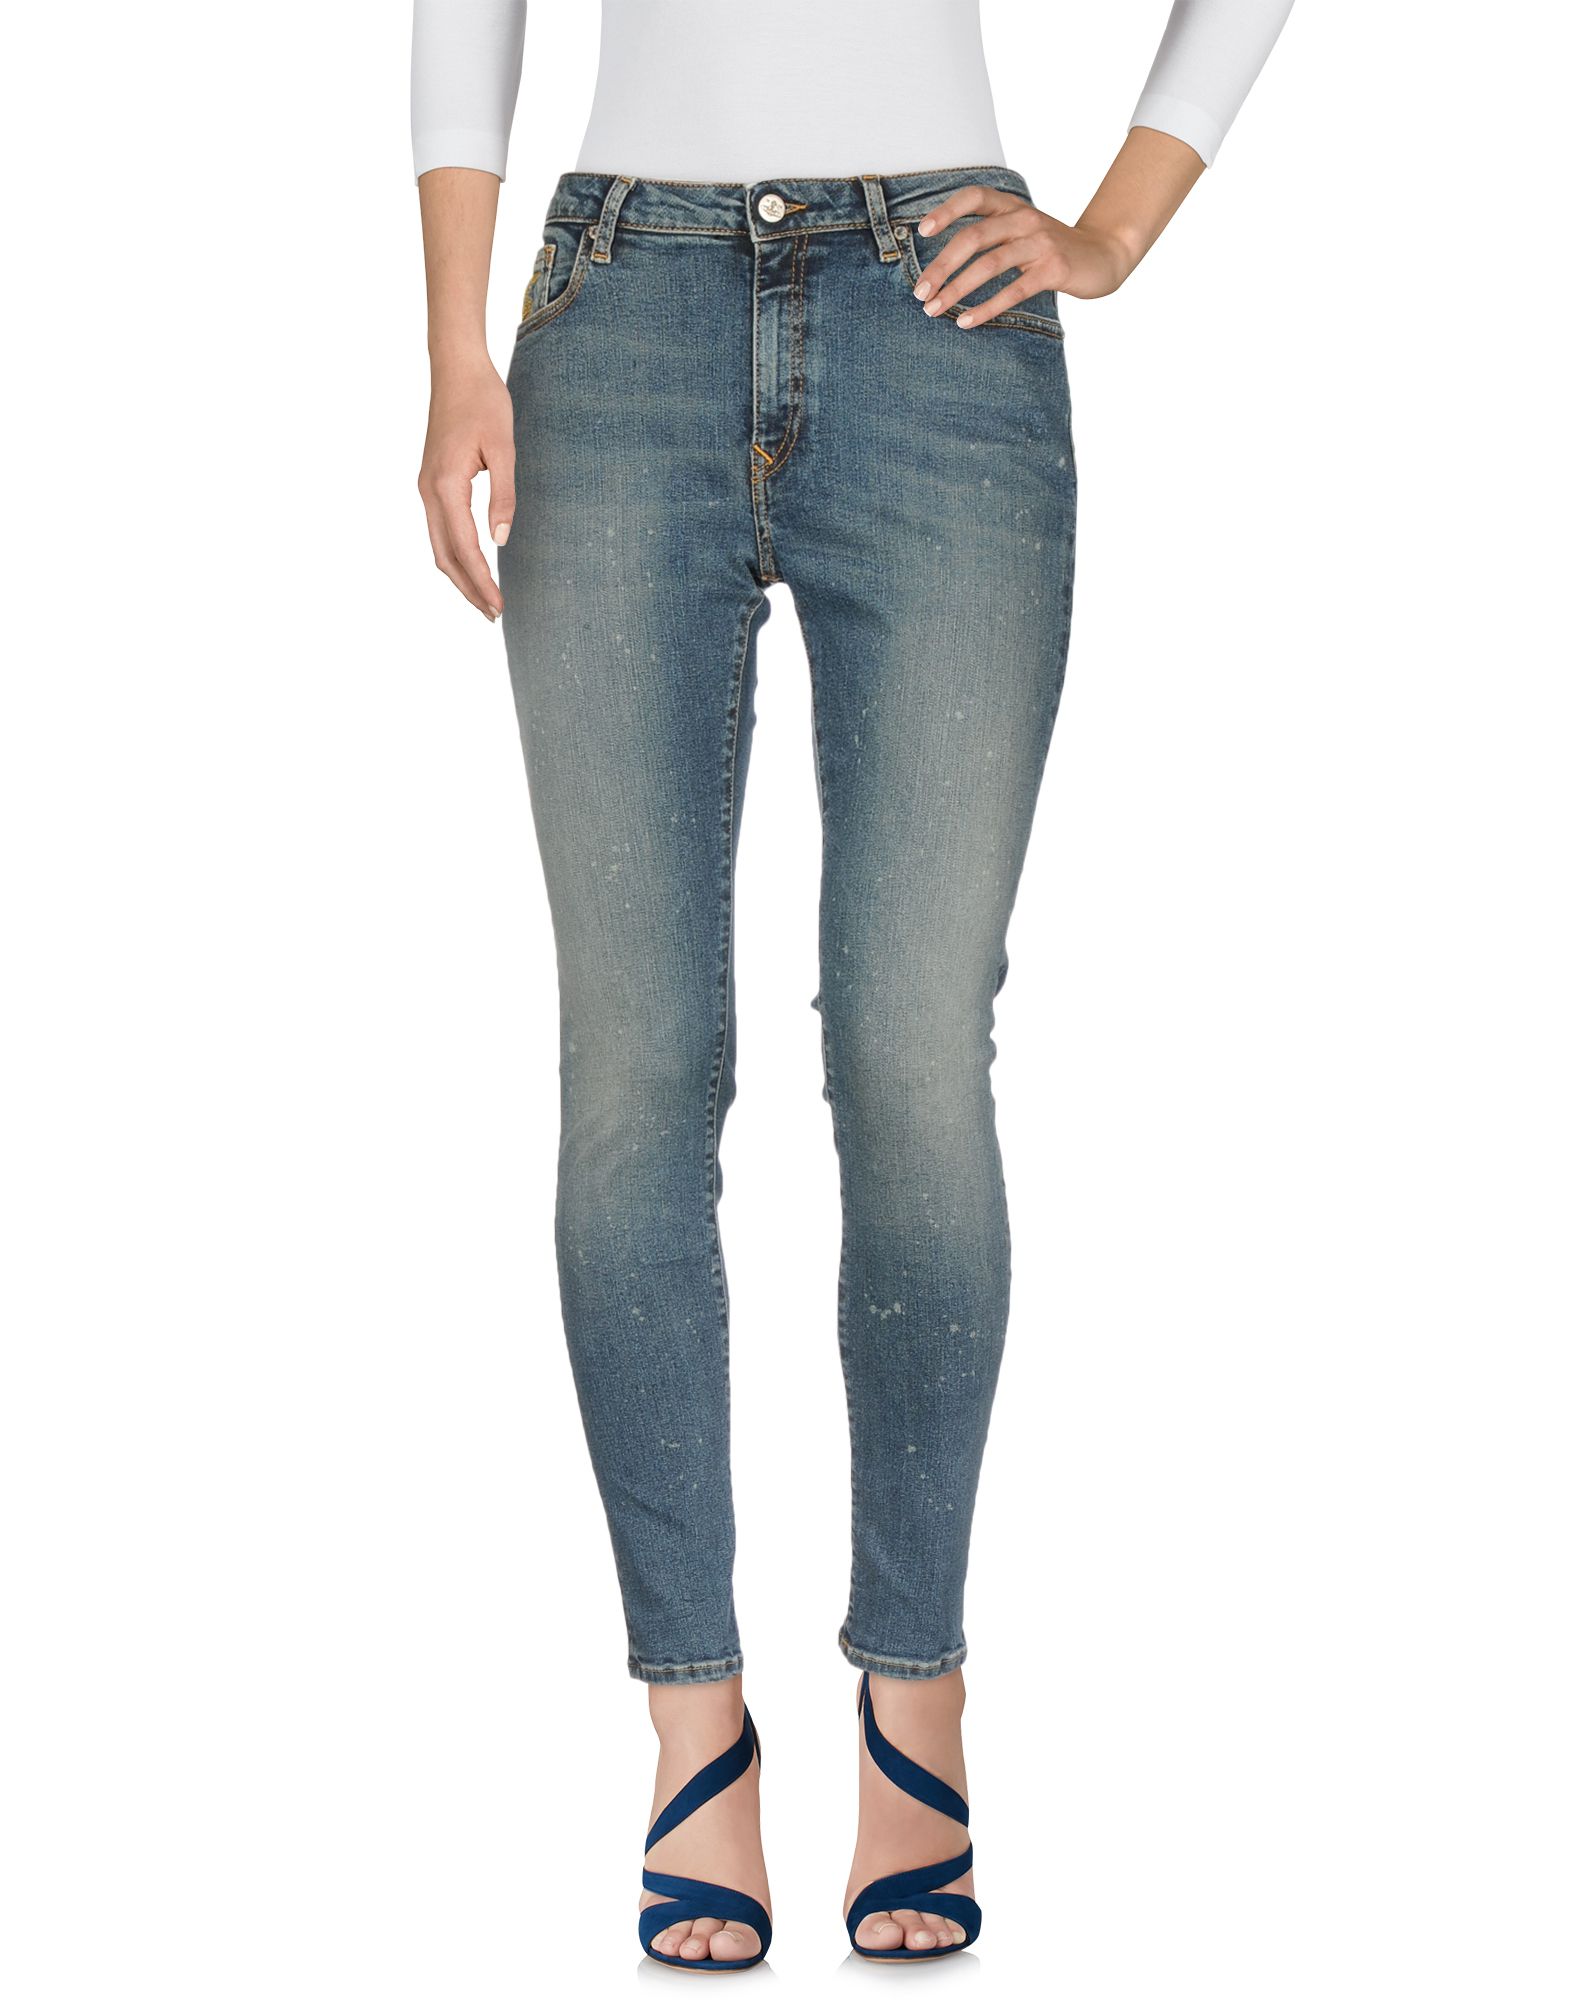 VIVIENNE WESTWOOD ANGLOMANIA JEANS,42670472OB 1